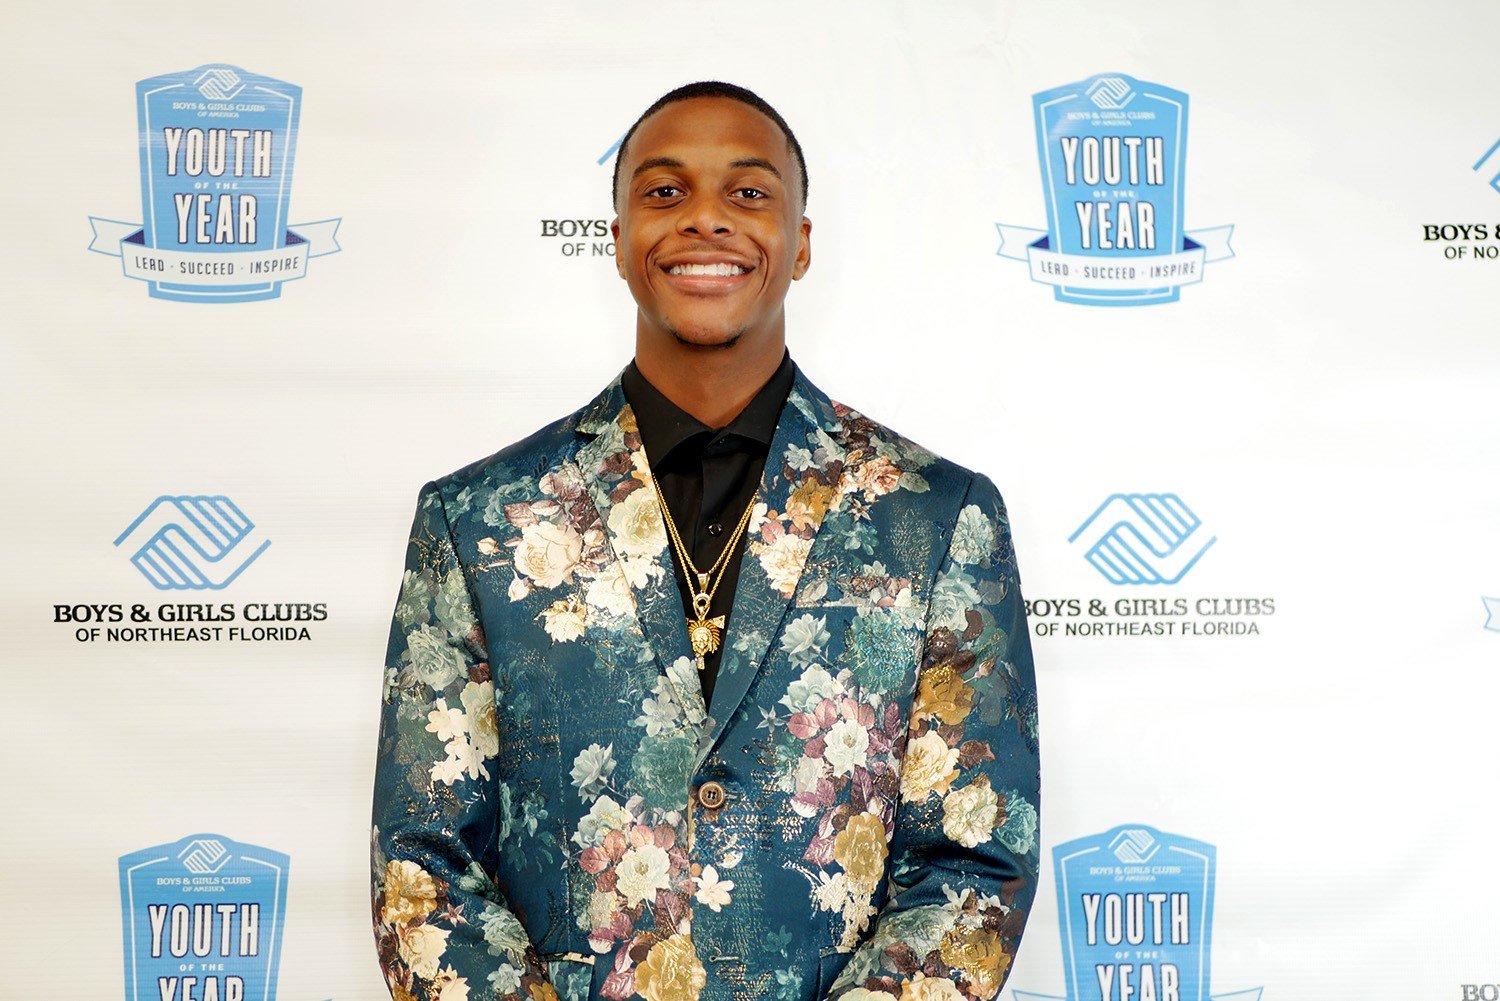 Boys & Girls Clubs of Northeast Florida’s 2021 Youth of the Year winner Michael J. from Ed White High School Boys & Girls Club Teen Center.